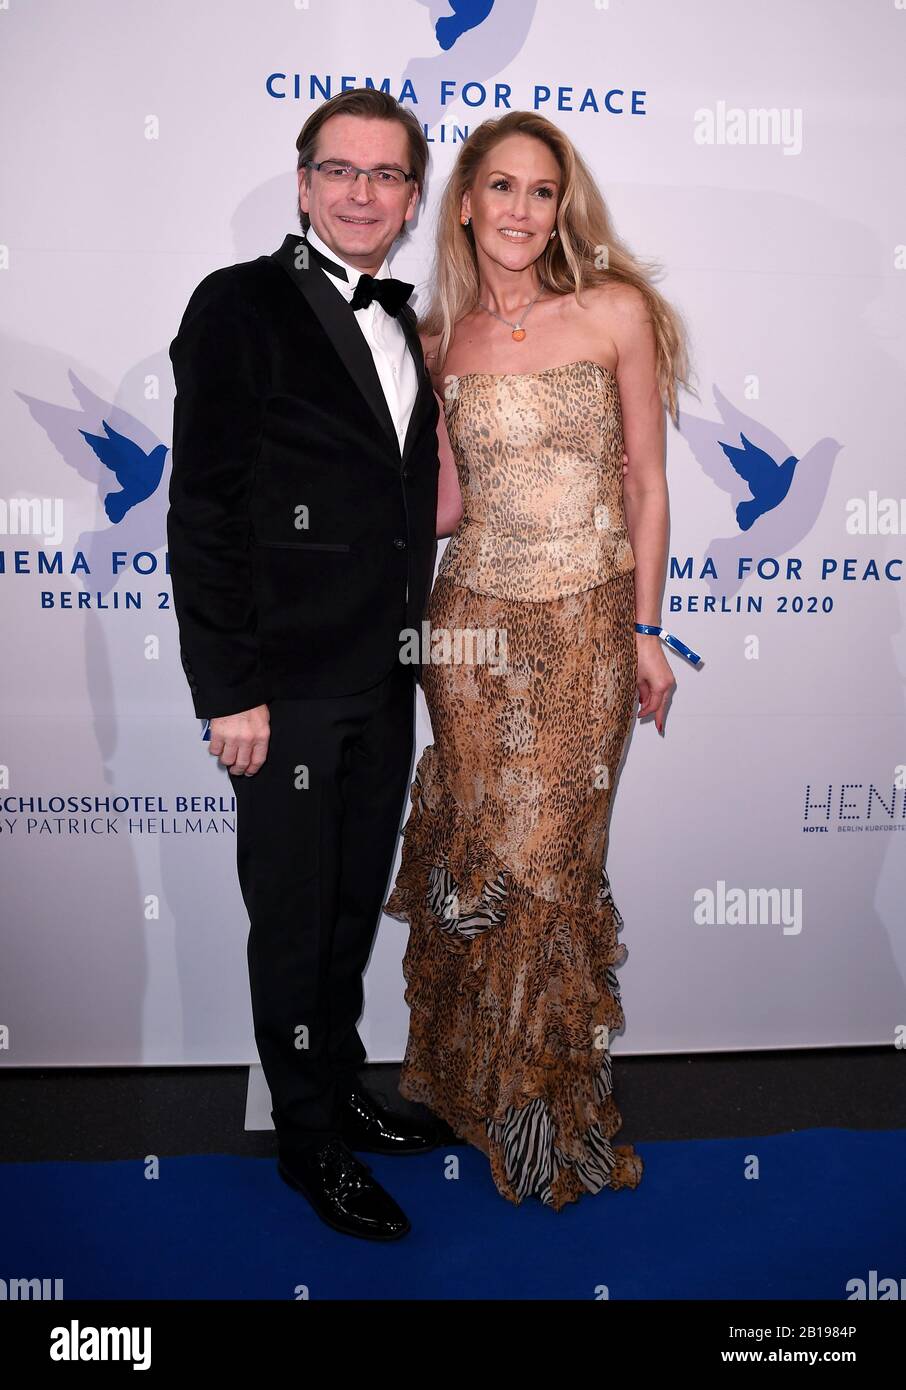 Berlin, Germany. 23rd Feb, 2020. 70th Berlinale, Cinema for Peace Gala: Journalist Claus Strunz and Daniela Oliel. The International Film Festival takes place from 20.02. to 01.03.2020. Credit: Britta Pedersen/dpa-Zentralbild/dpa/Alamy Live News Stock Photo